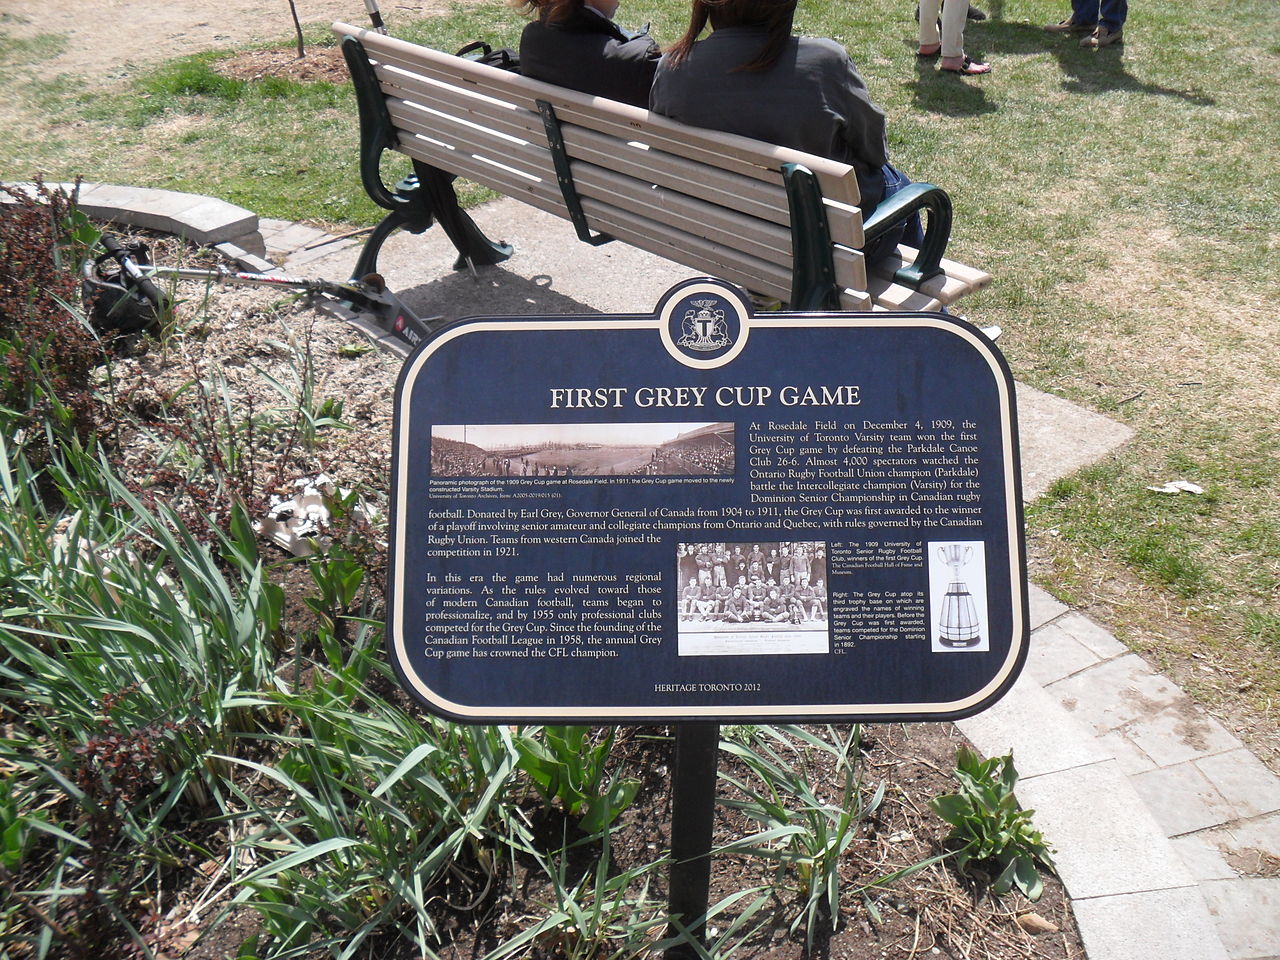 Plaque showing Rosedale Park in Toronto as place of first Grey Cup game